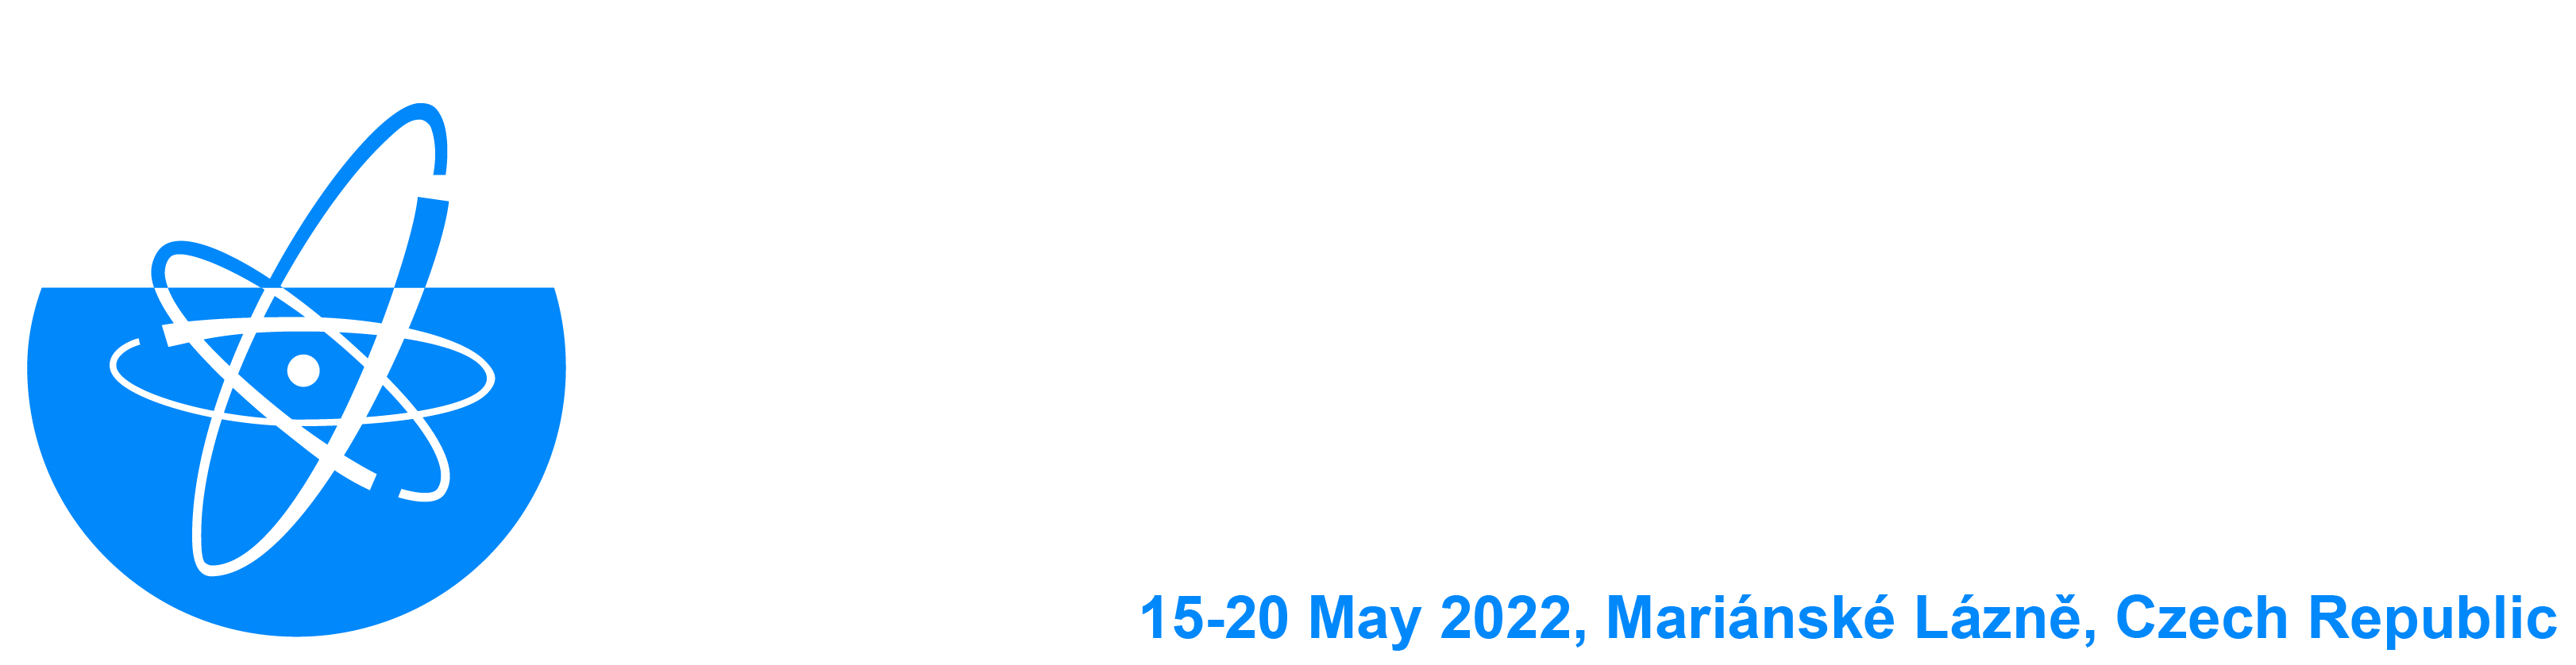 19th Radiochemical Conference